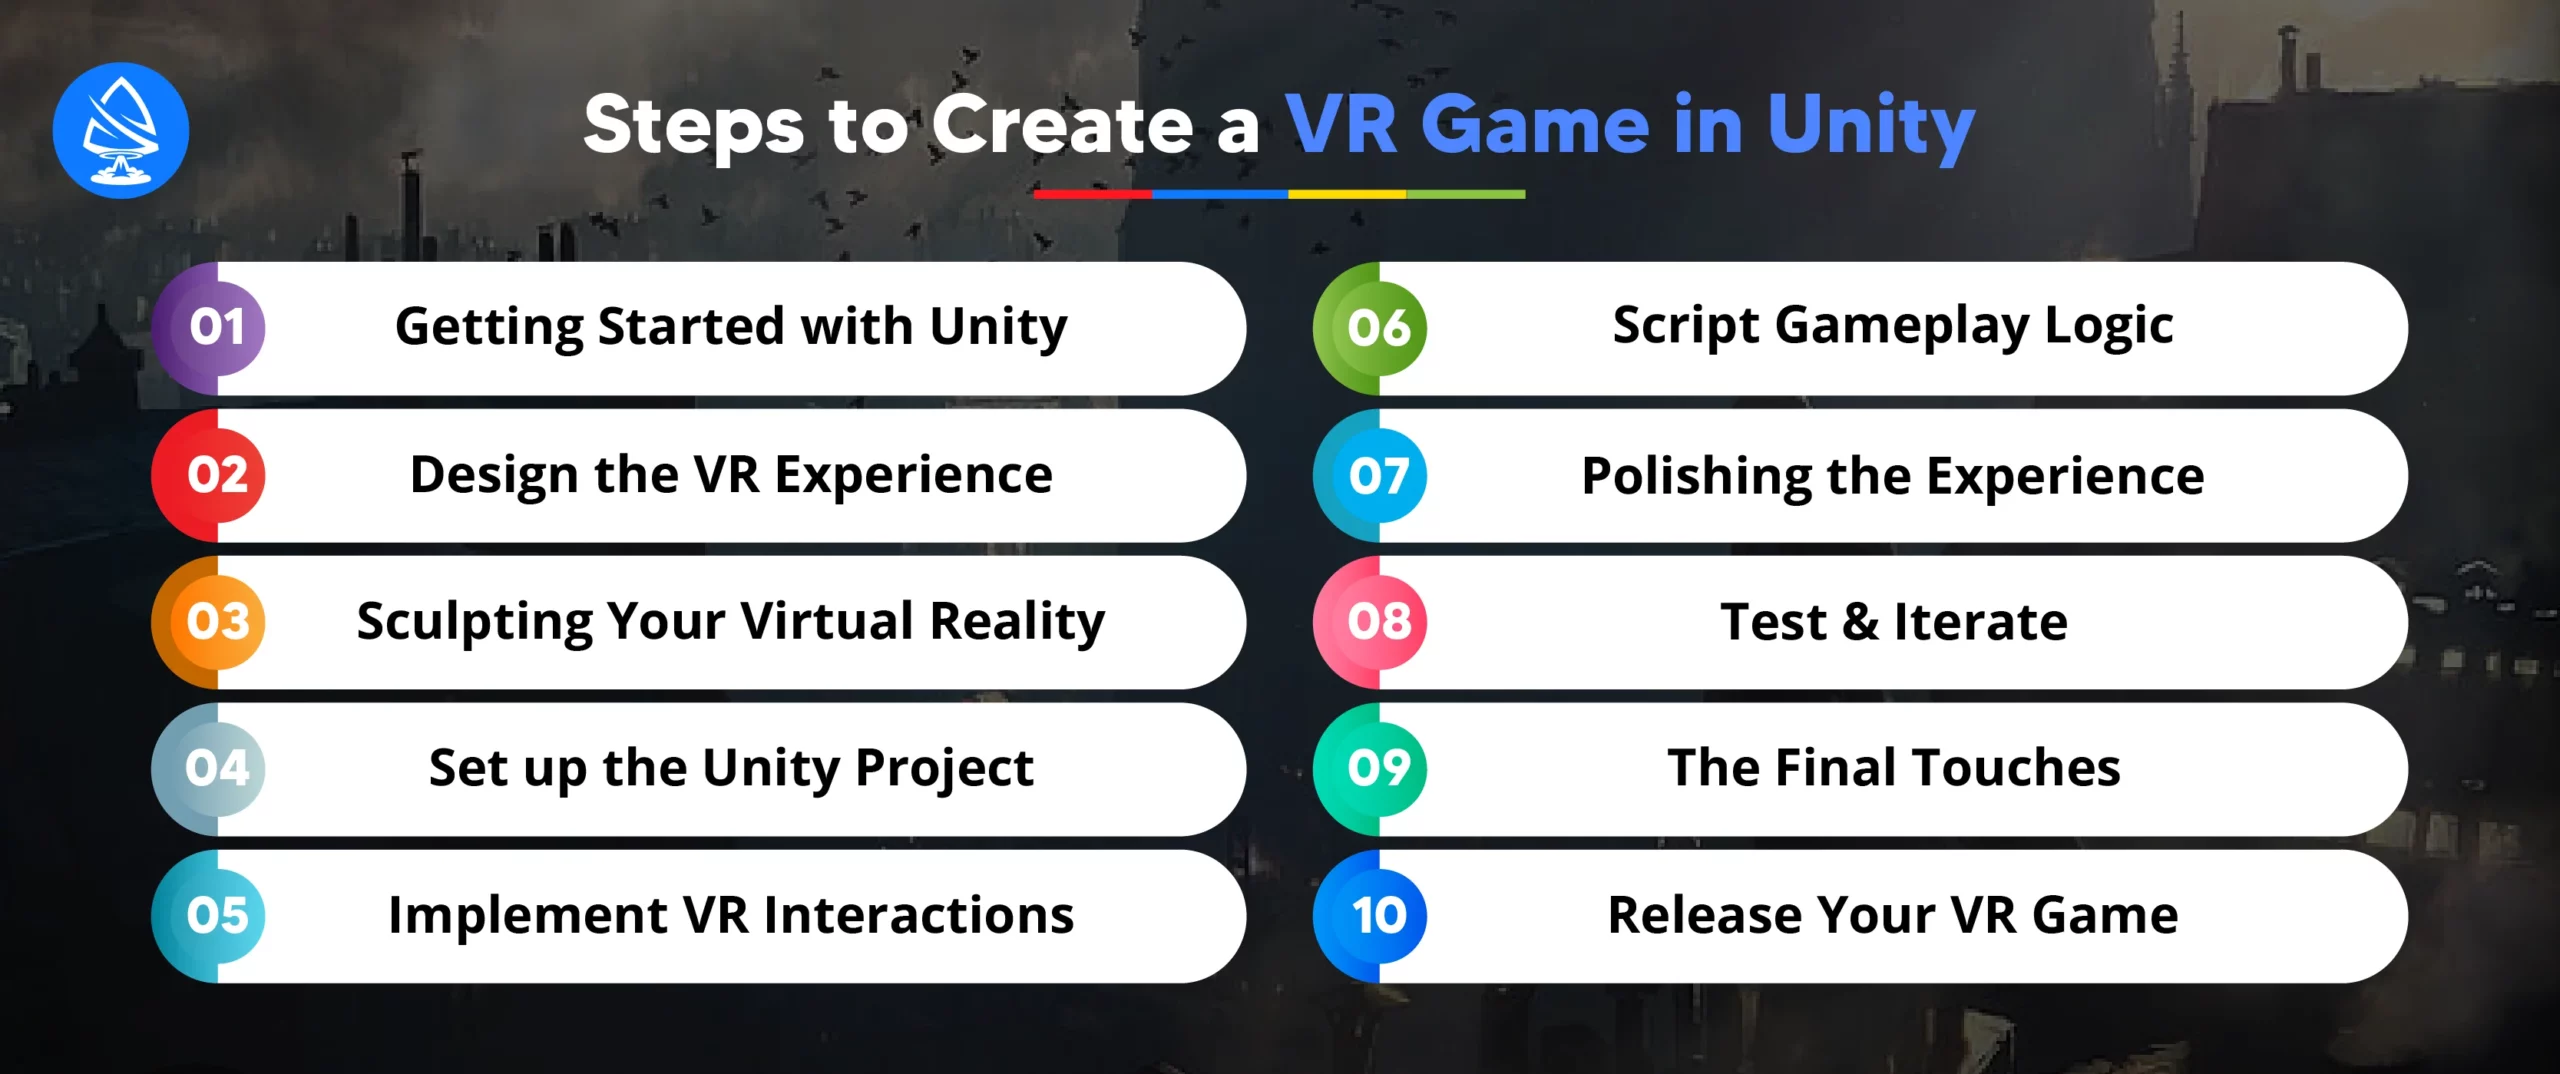 Steps to Create a VR Game in Unity